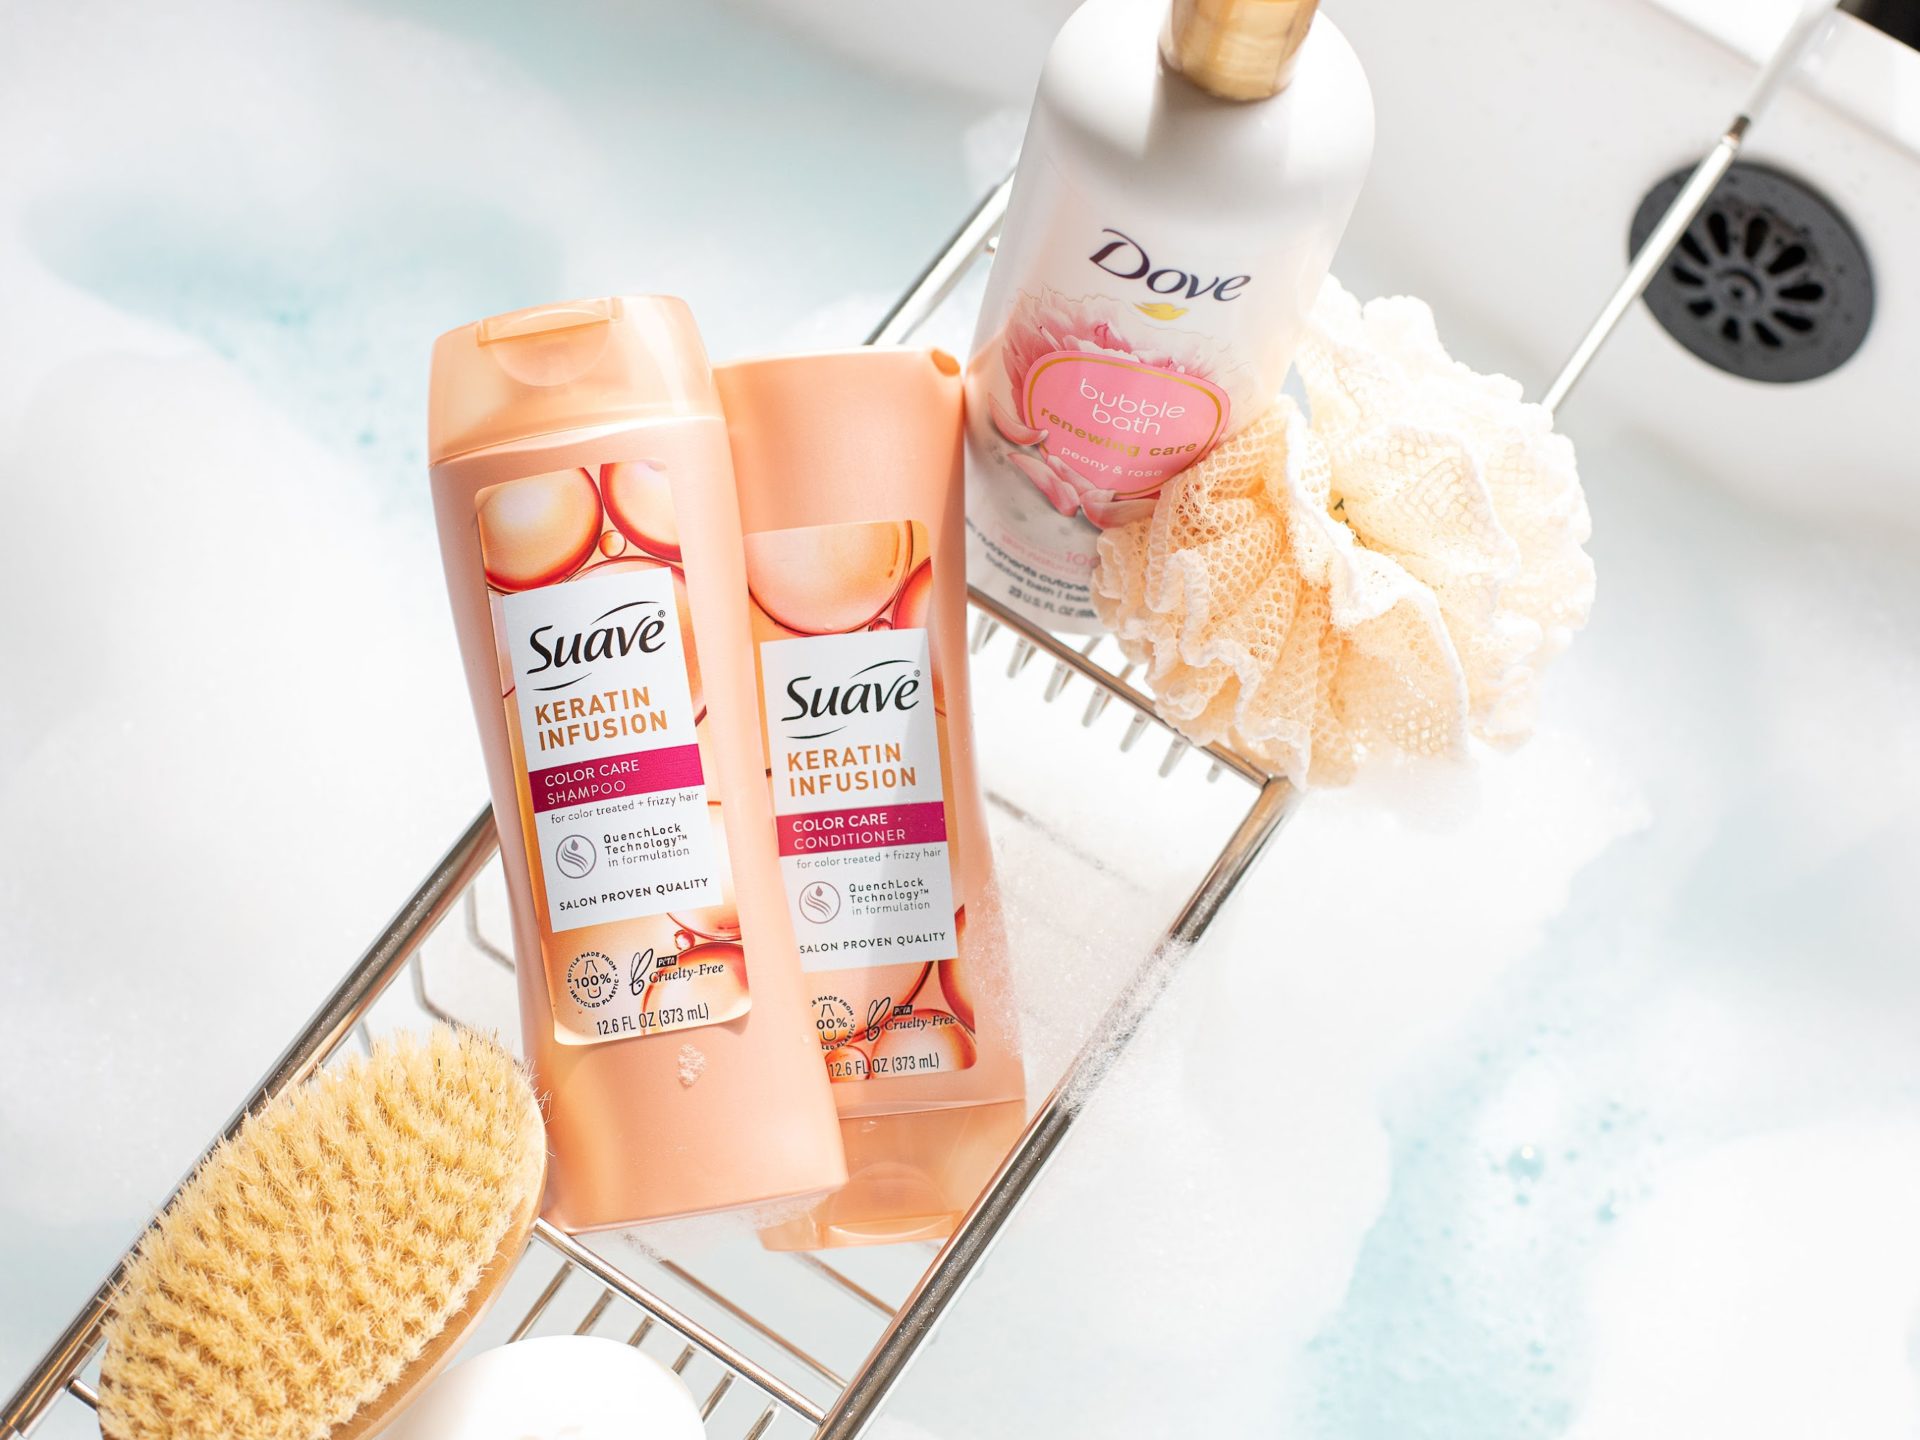 Get Suave Hair Care For $2.29 At Kroger